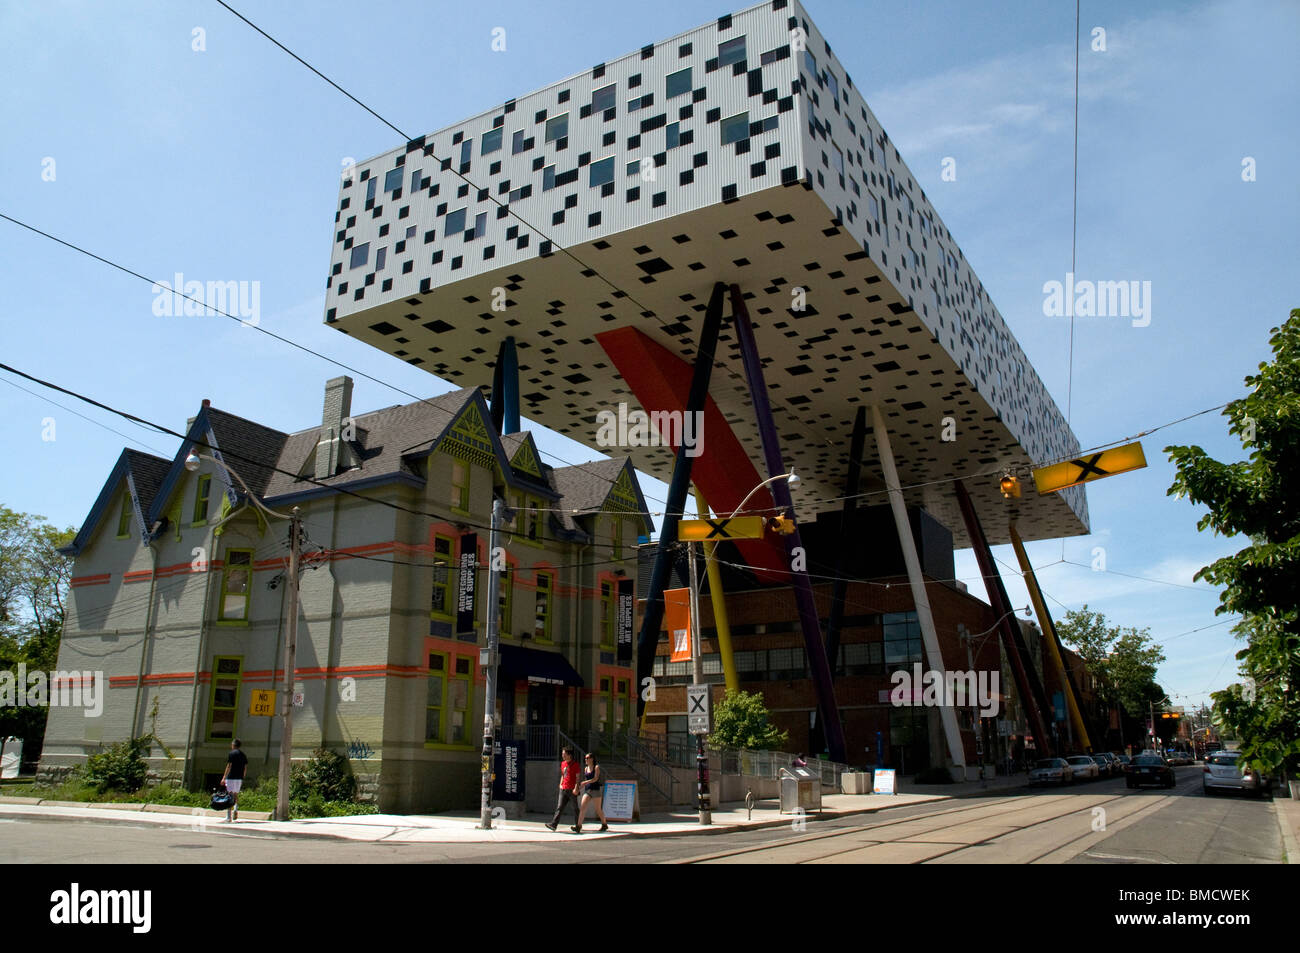 The experimental Sharp Centre for Design building at the Ontario College of Art and Design (OCAD University), in downtown Toronto, Ontario, Canada Stock Photo